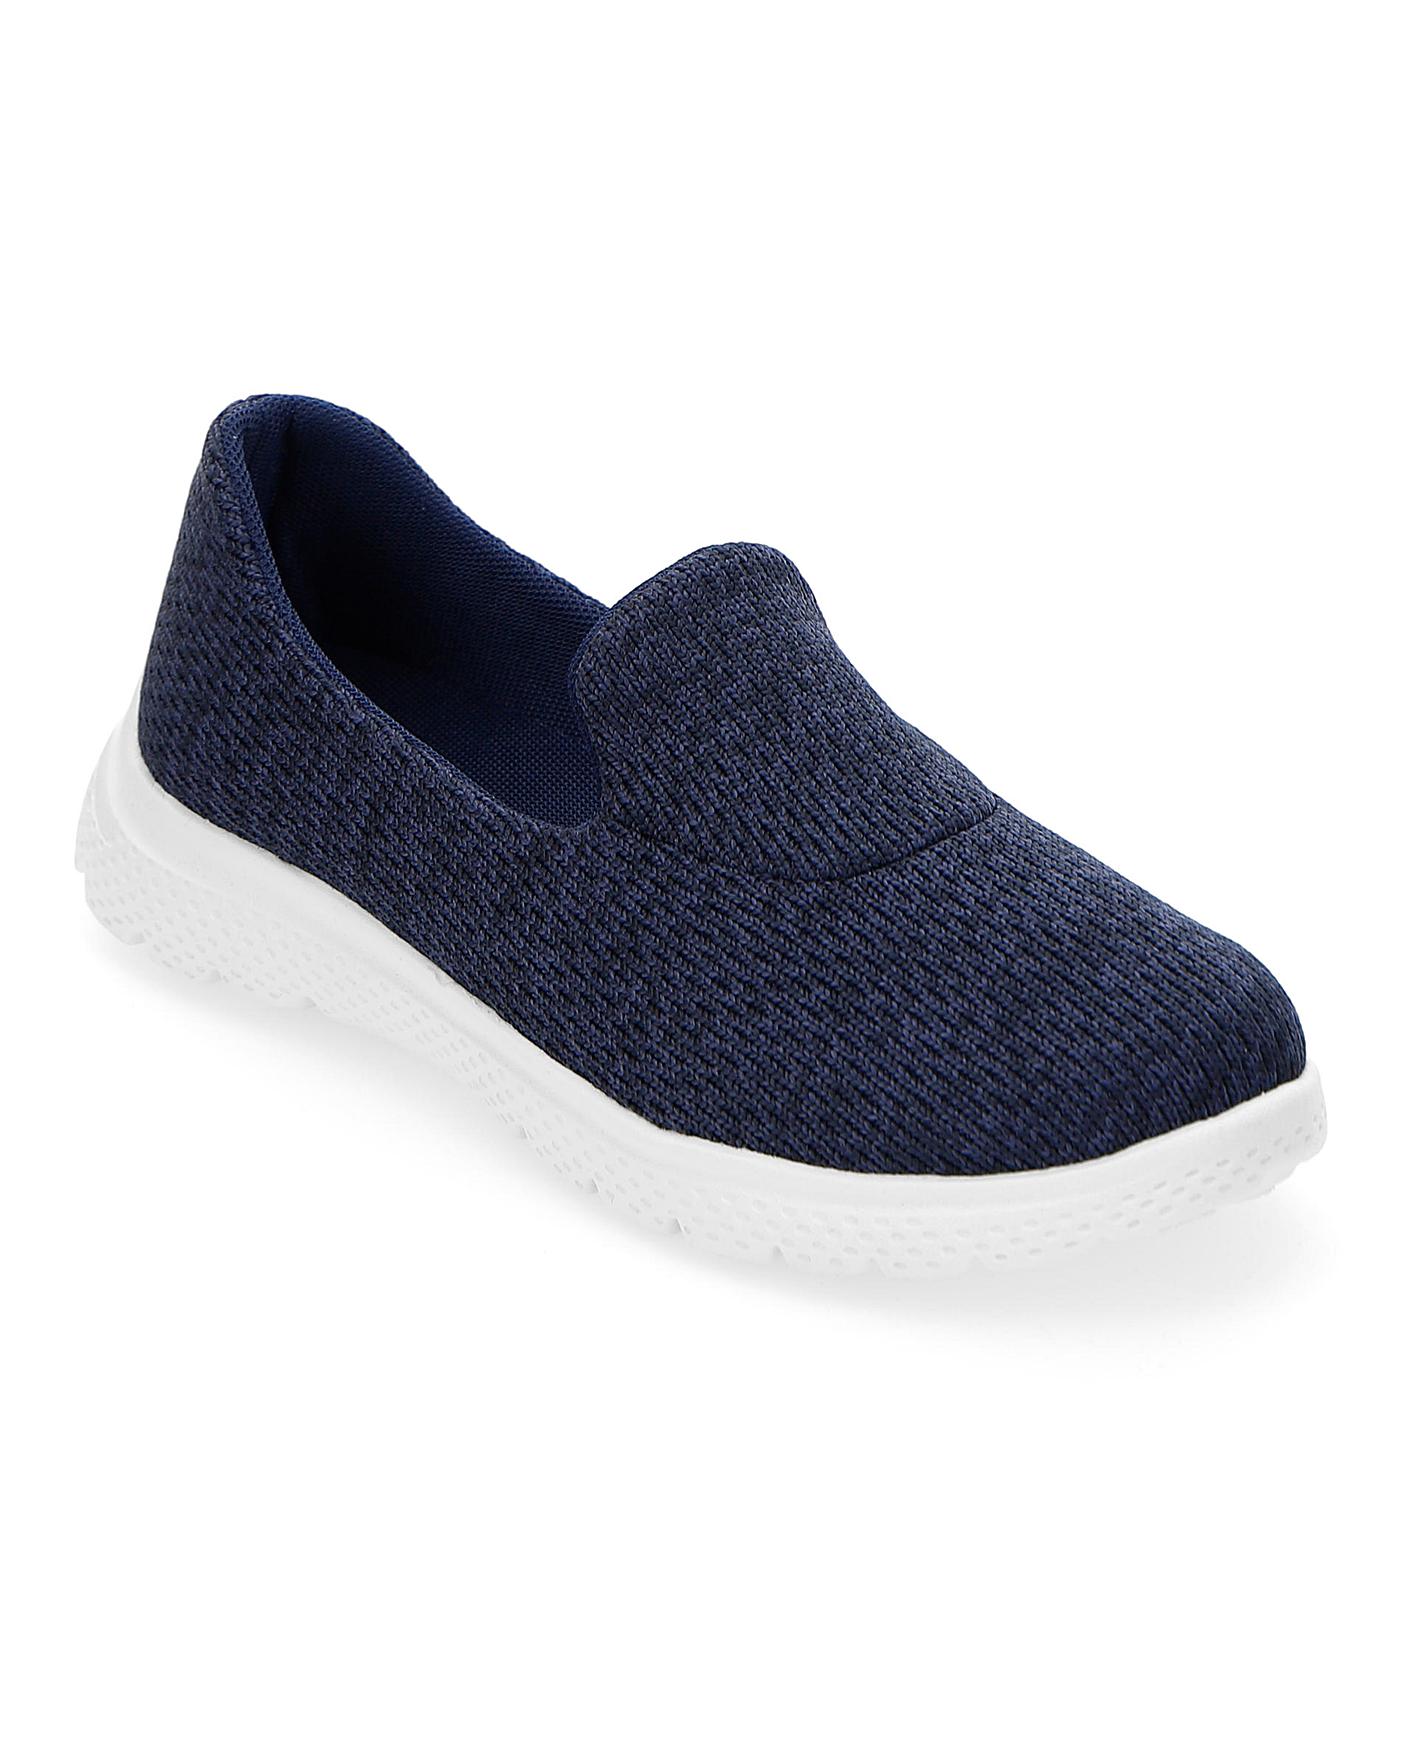 Cushion Walk Leisure Shoes E Fit | Simply Be